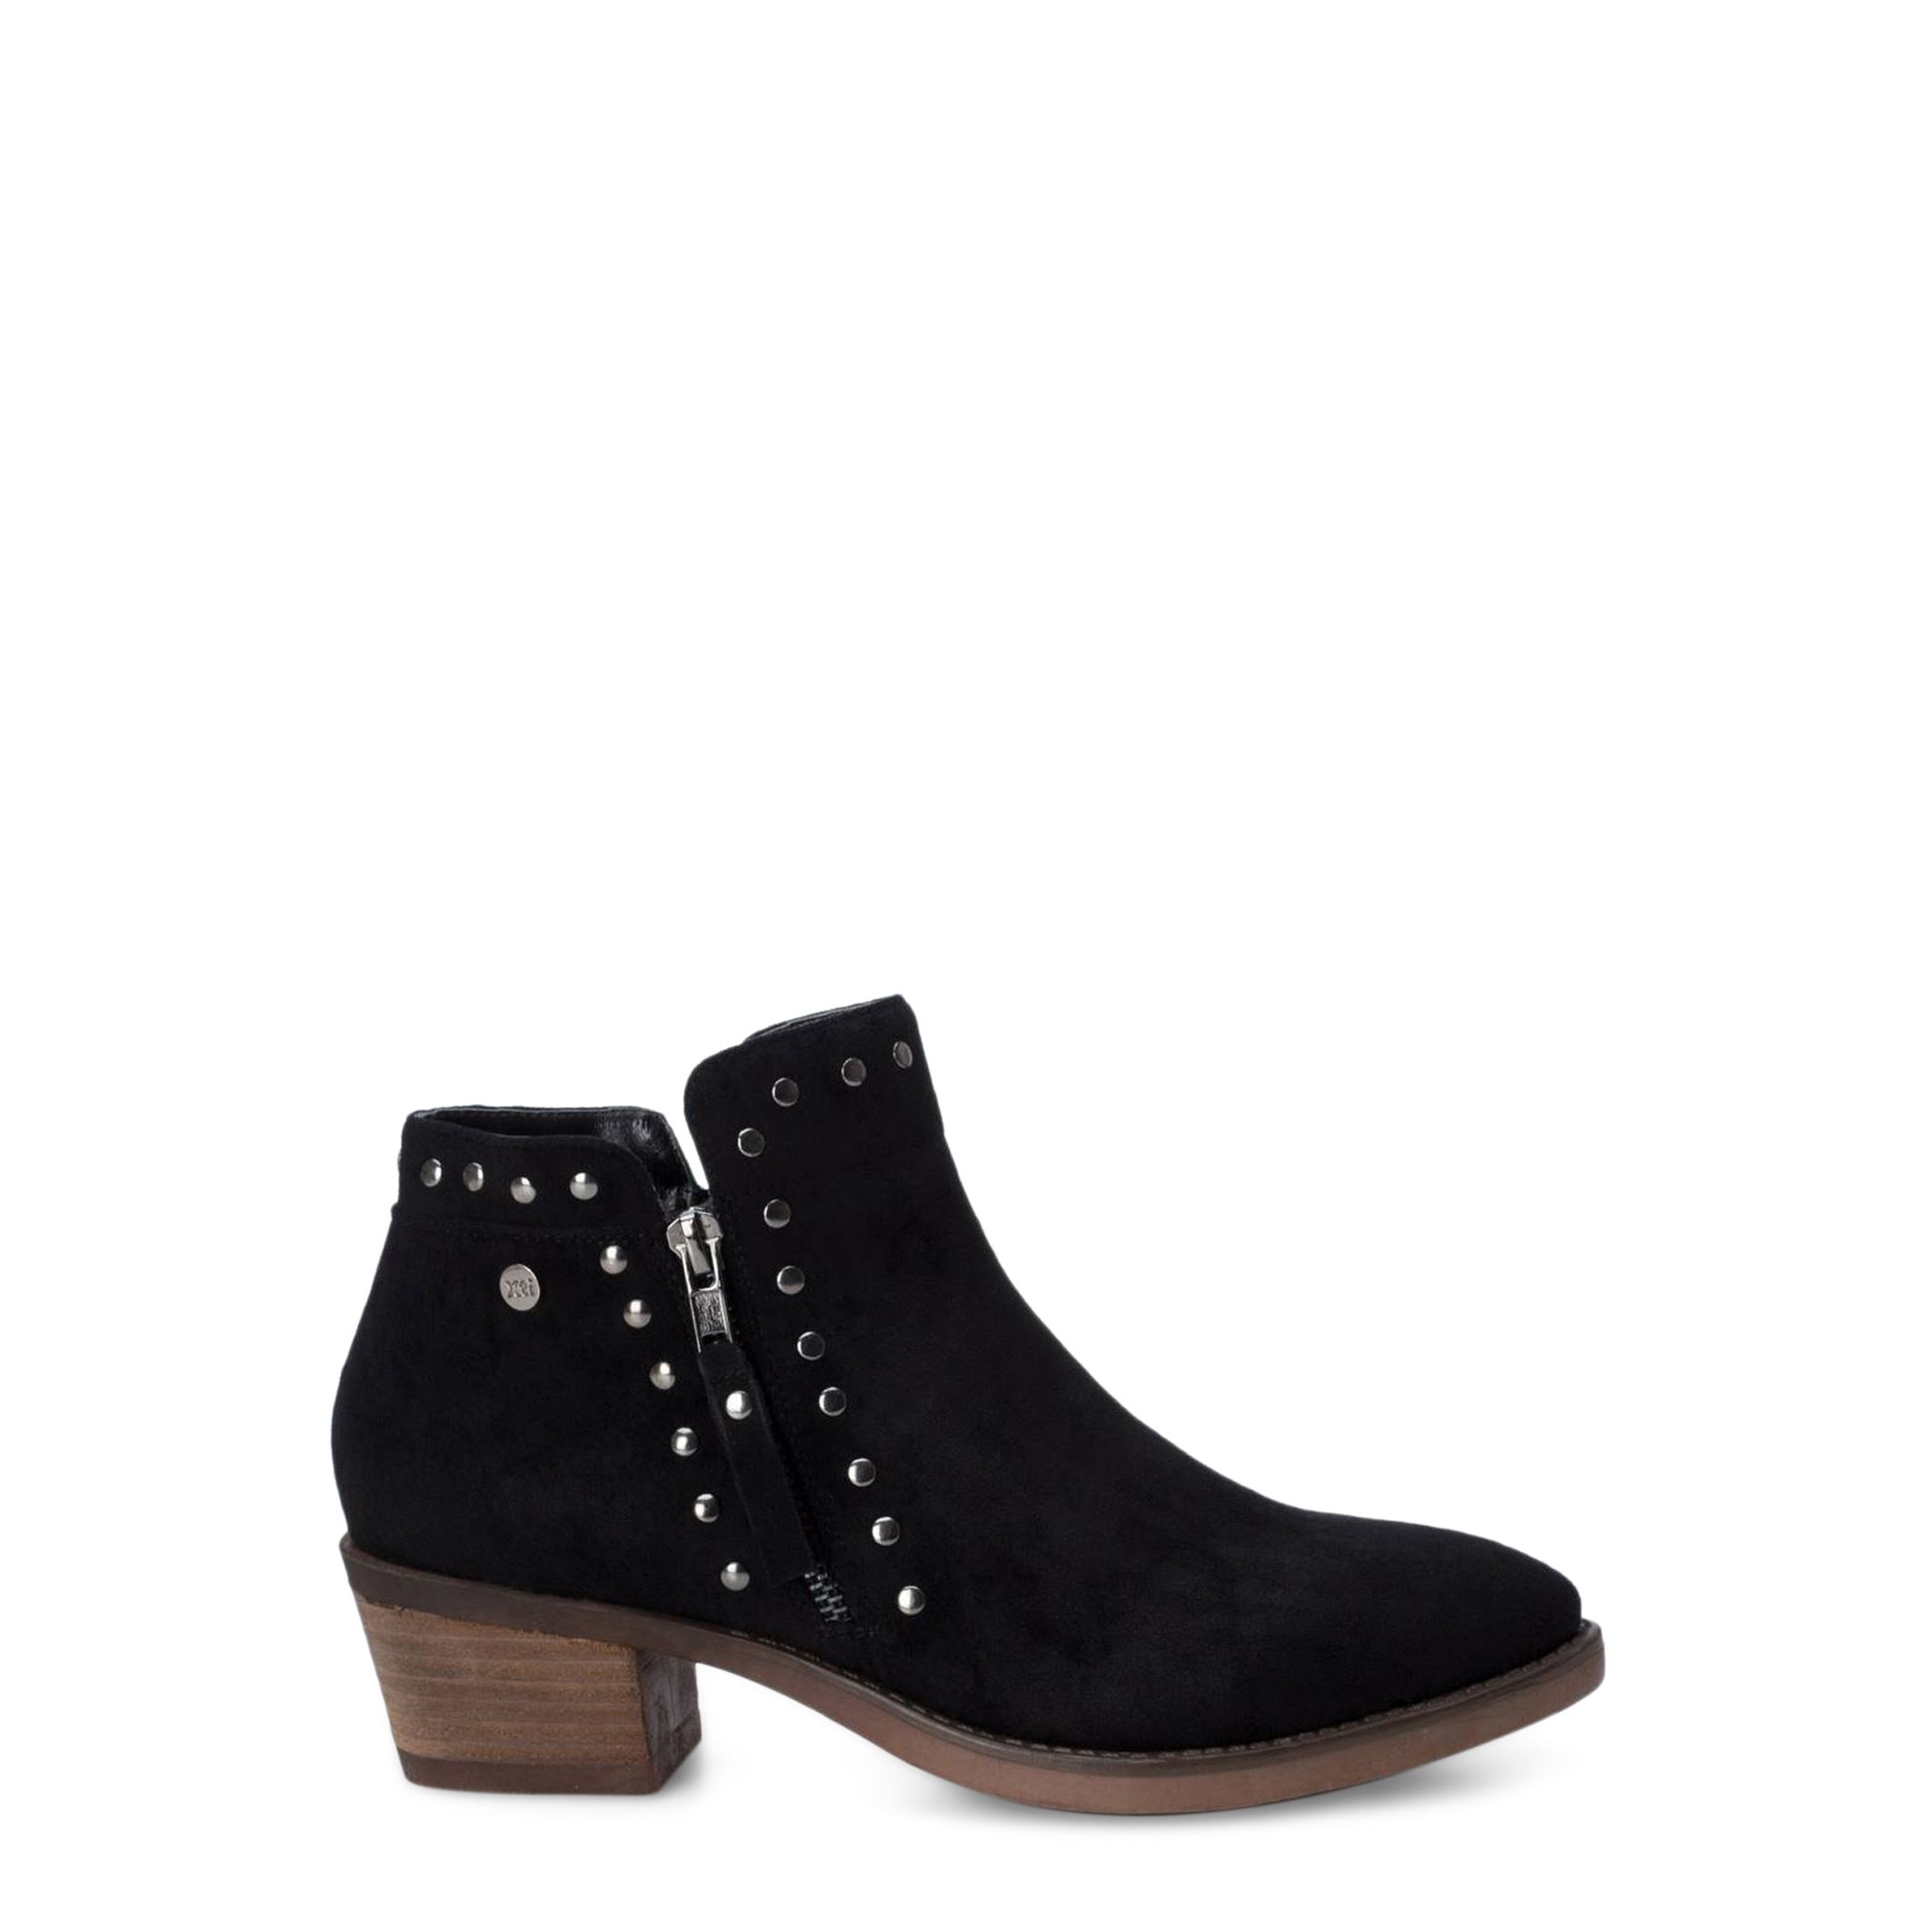 Collection: Fall/Winter <br> Gender: Woman <br> Type: Ankle boots <br> Upper: synthetic suede, fabric <br> Internal lining: synthetic material, fabric <br> Sole: rubber <br> Heel height cm: 5 <br> Details: studs, pointed toe, side zip